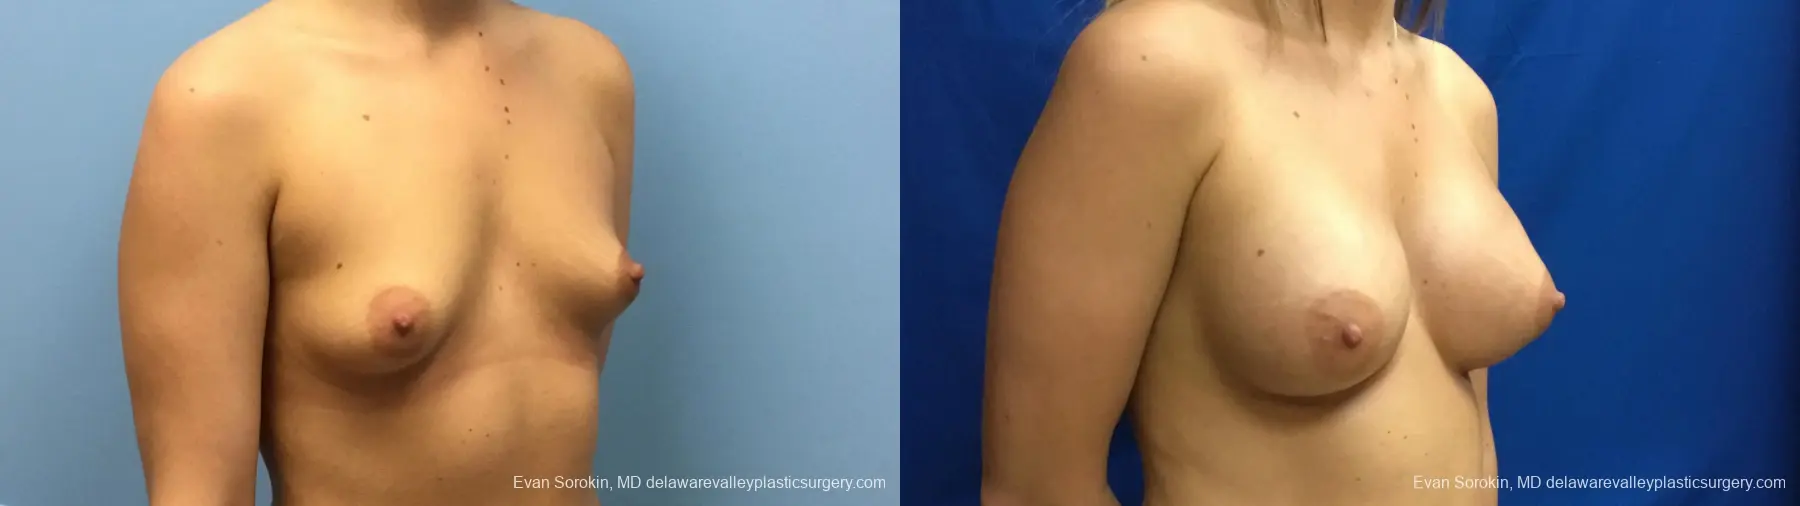 Philadelphia Breast Augmentation 12540 - Before and After 2